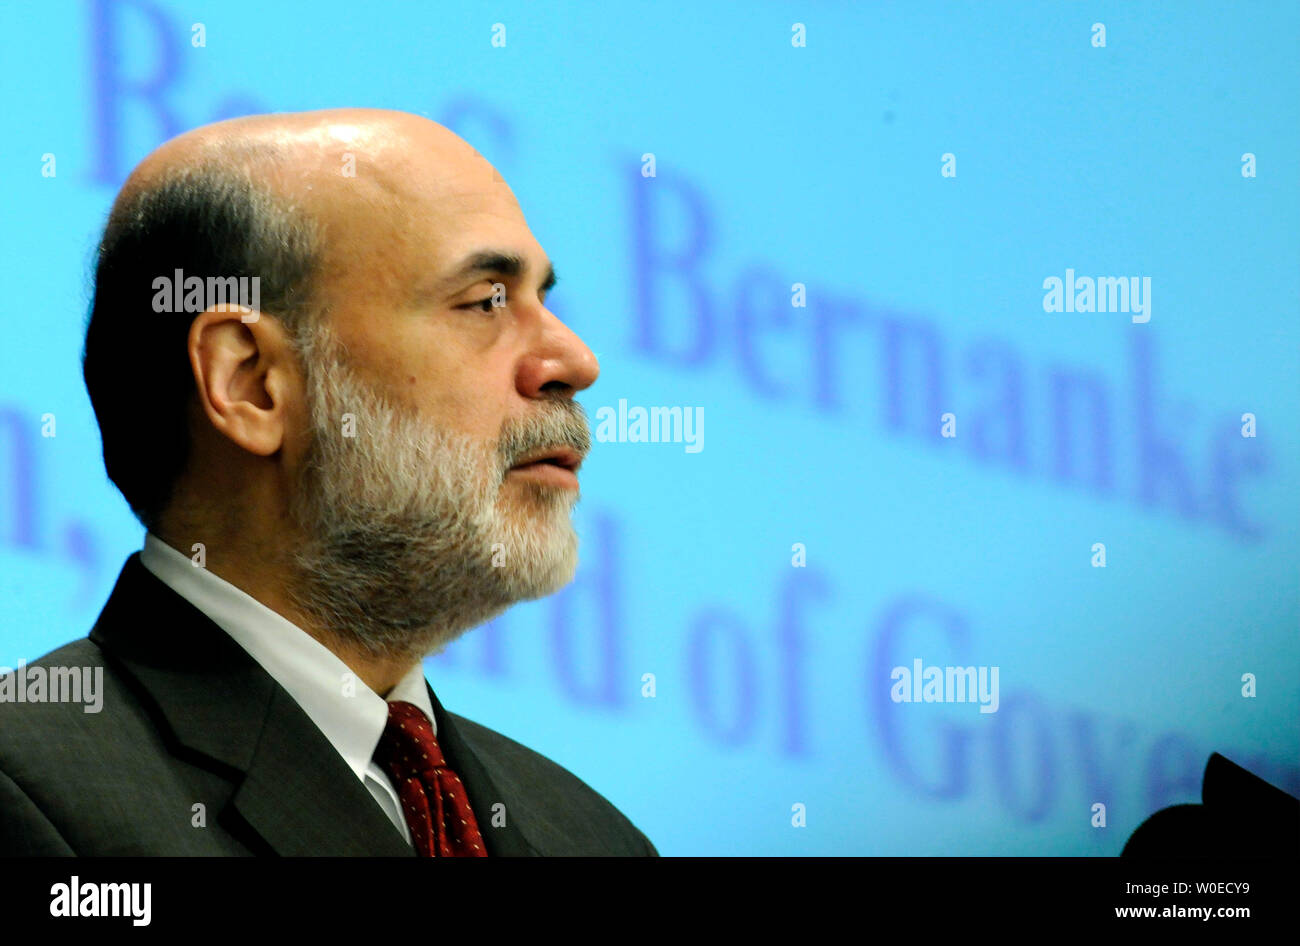 Federal Reserve Board Chairman Ben Bernanke delivers remarks on financial regulations and stability during the Federal Deposit Insurance Corporation's (FDIC) forum on mortgage lending for low and moderate income households at the FDIC in Arlington, Virginia on July 8, 2008. (UPI Photo/Kevin Dietsch) Stock Photo